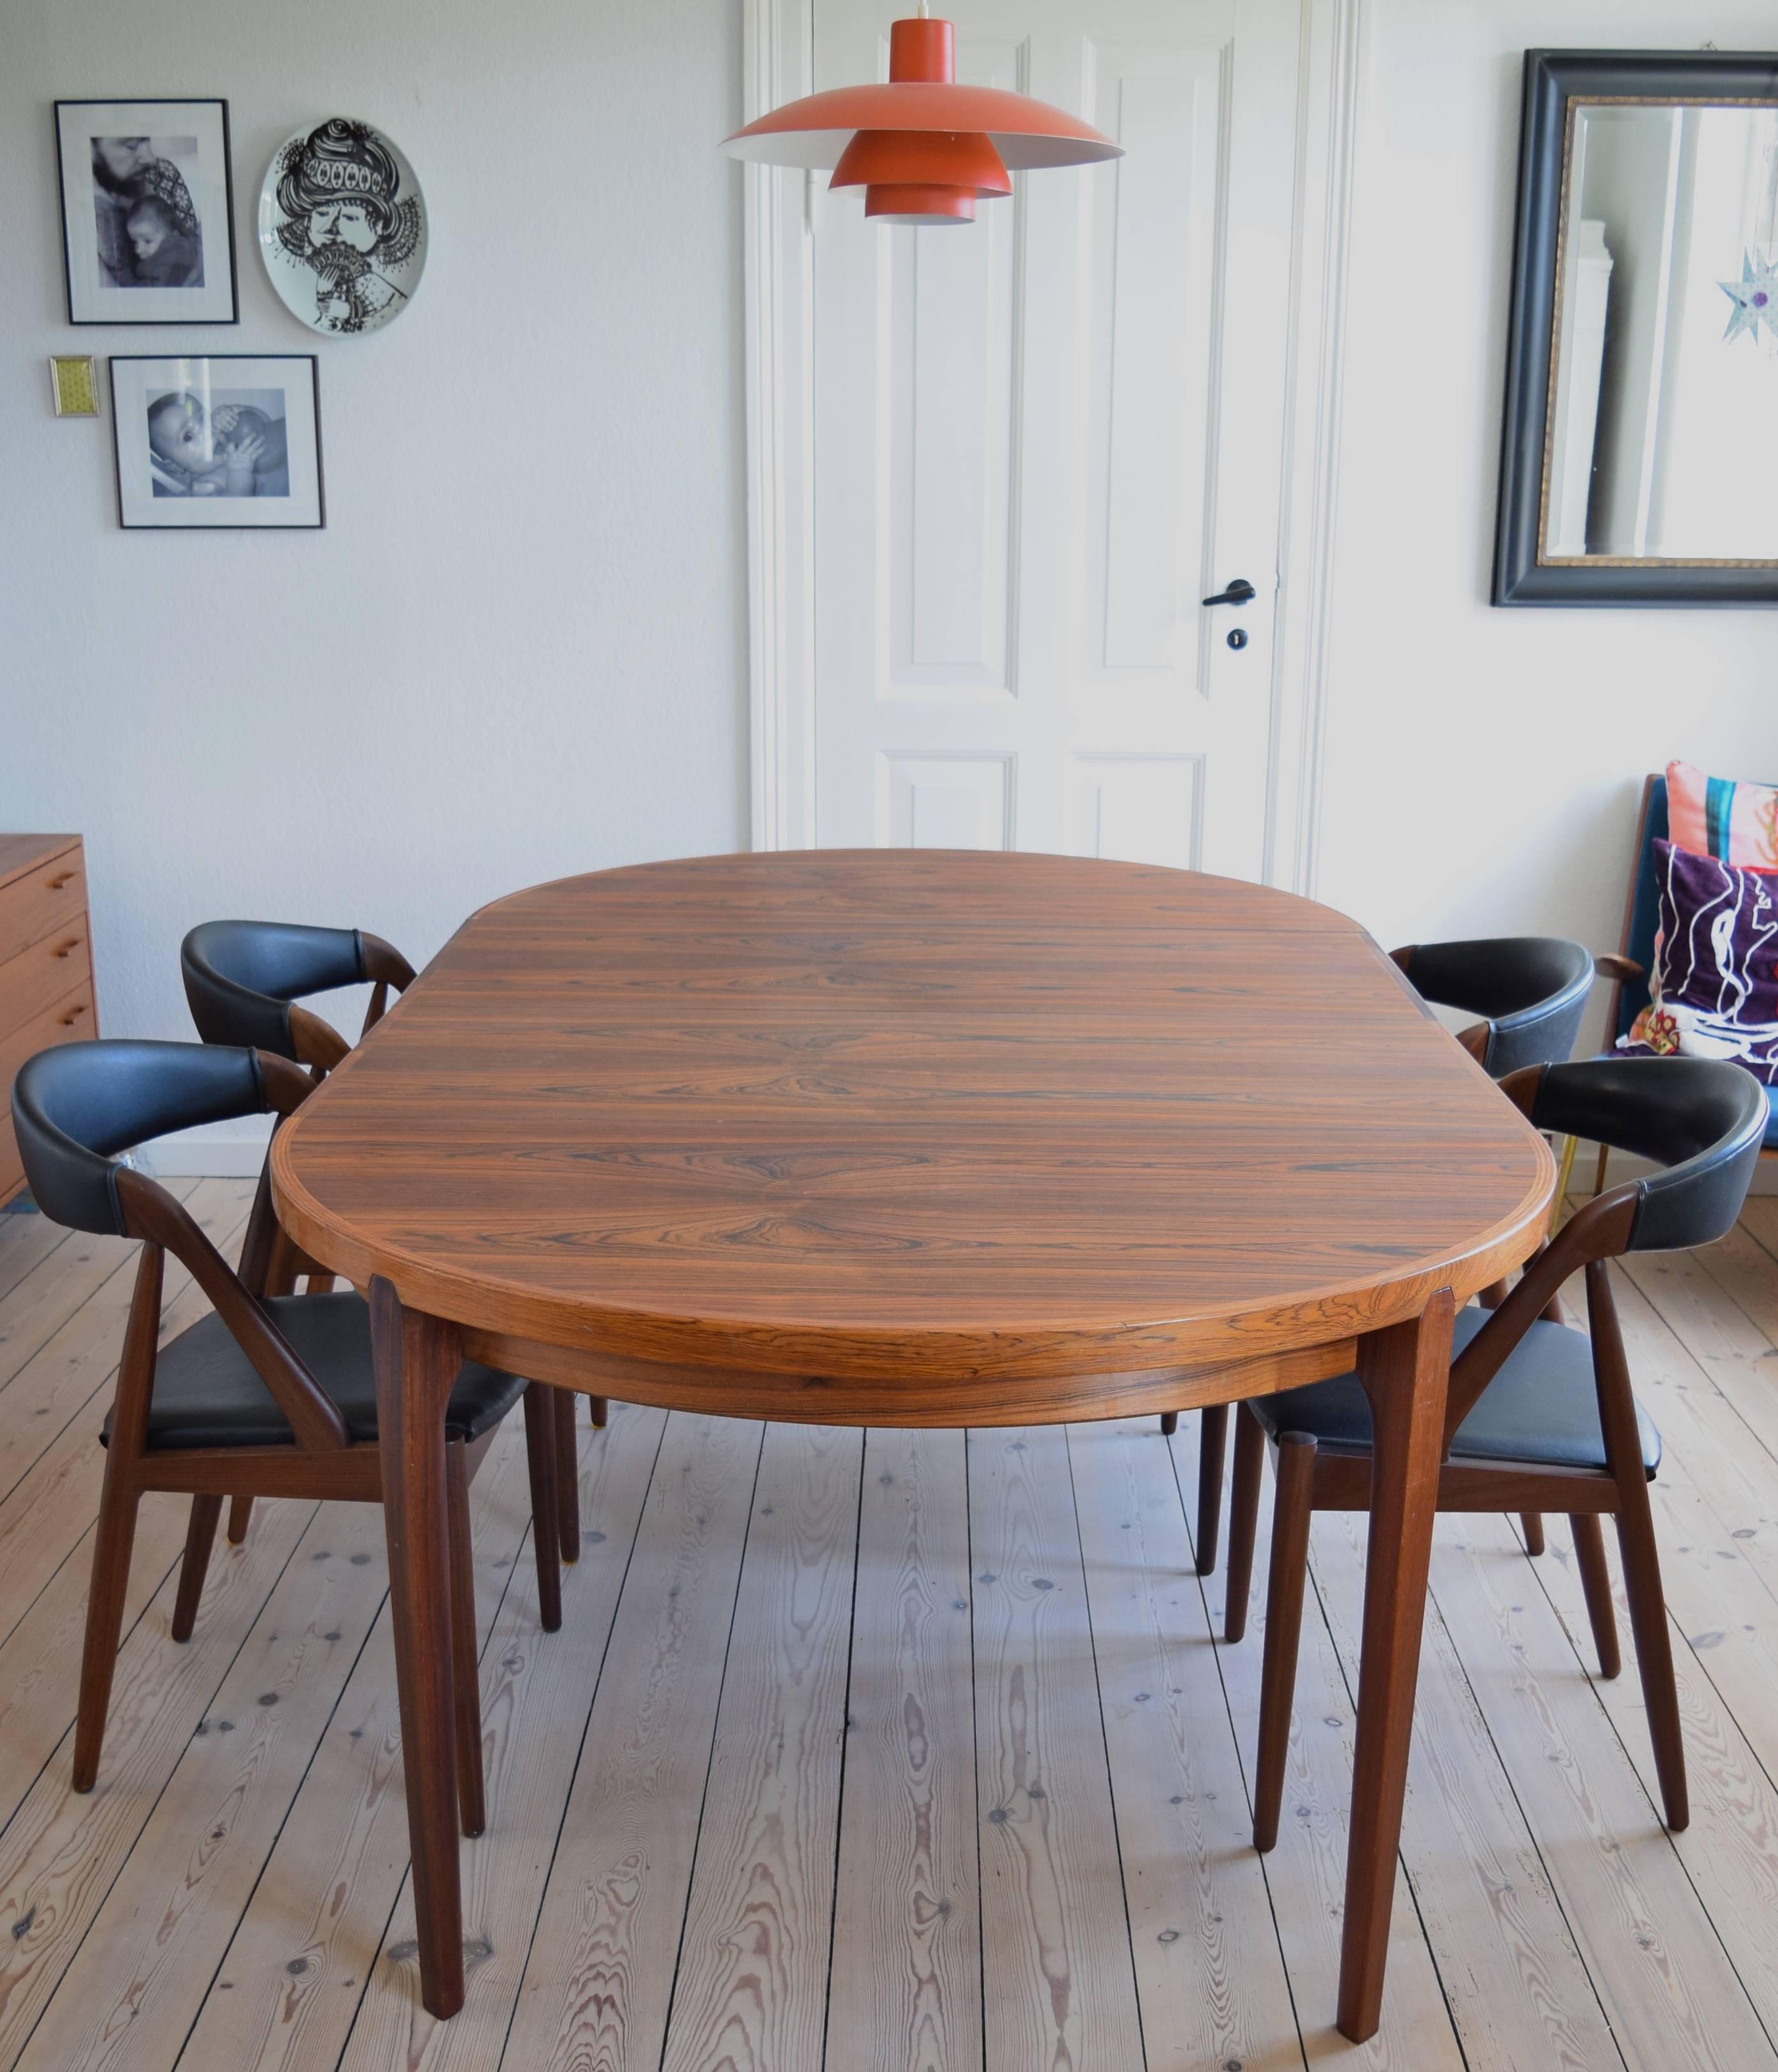 Rosewood dining table produced by Heltborg Møbler, Denmark in the 1960s. It comes with two extension plates of 50cm to enlarge the table to 220 cm. Great Scandinavian craftsmanship throughout this piece, with a truly stunning matched grain on all